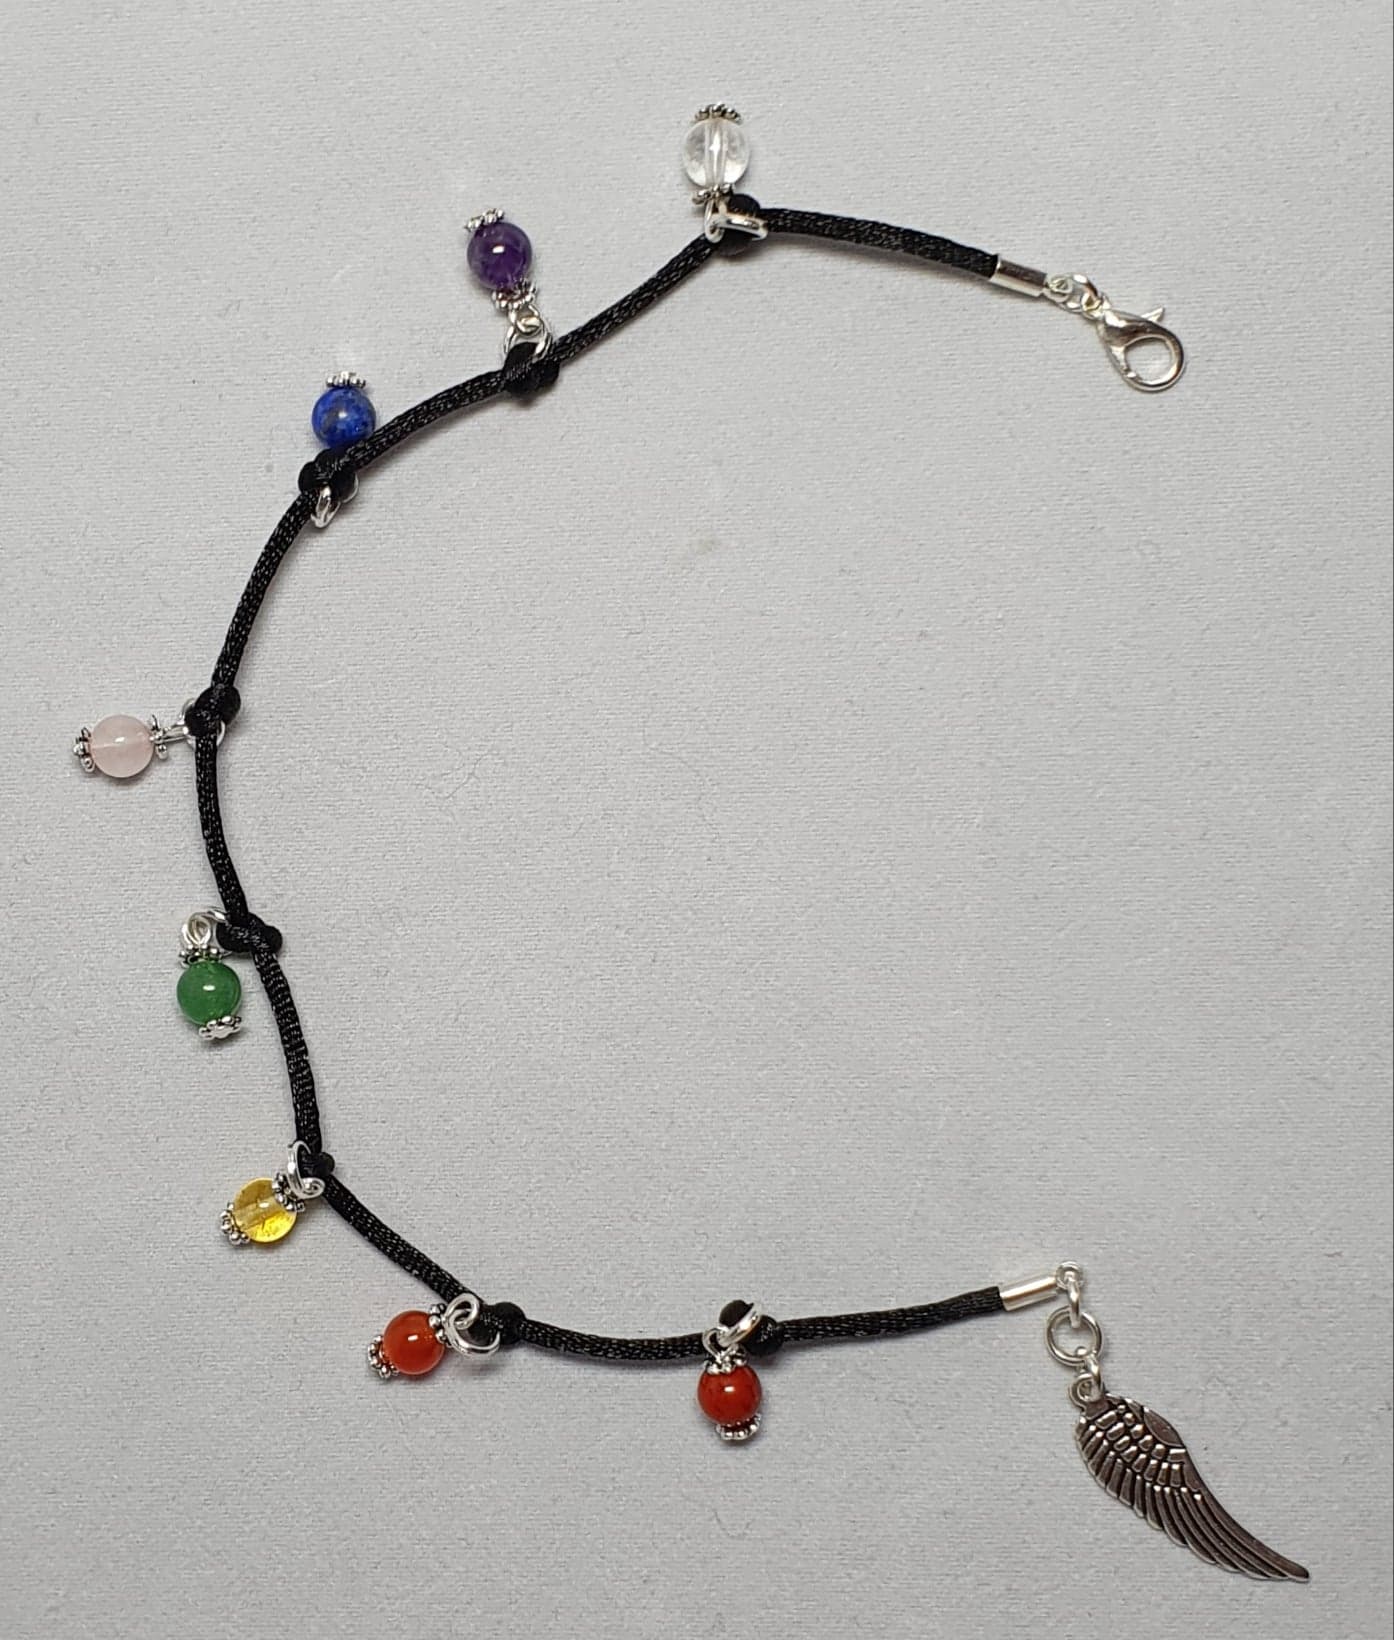 Anklet knotted satin cord with chakra crystals & choice of charm